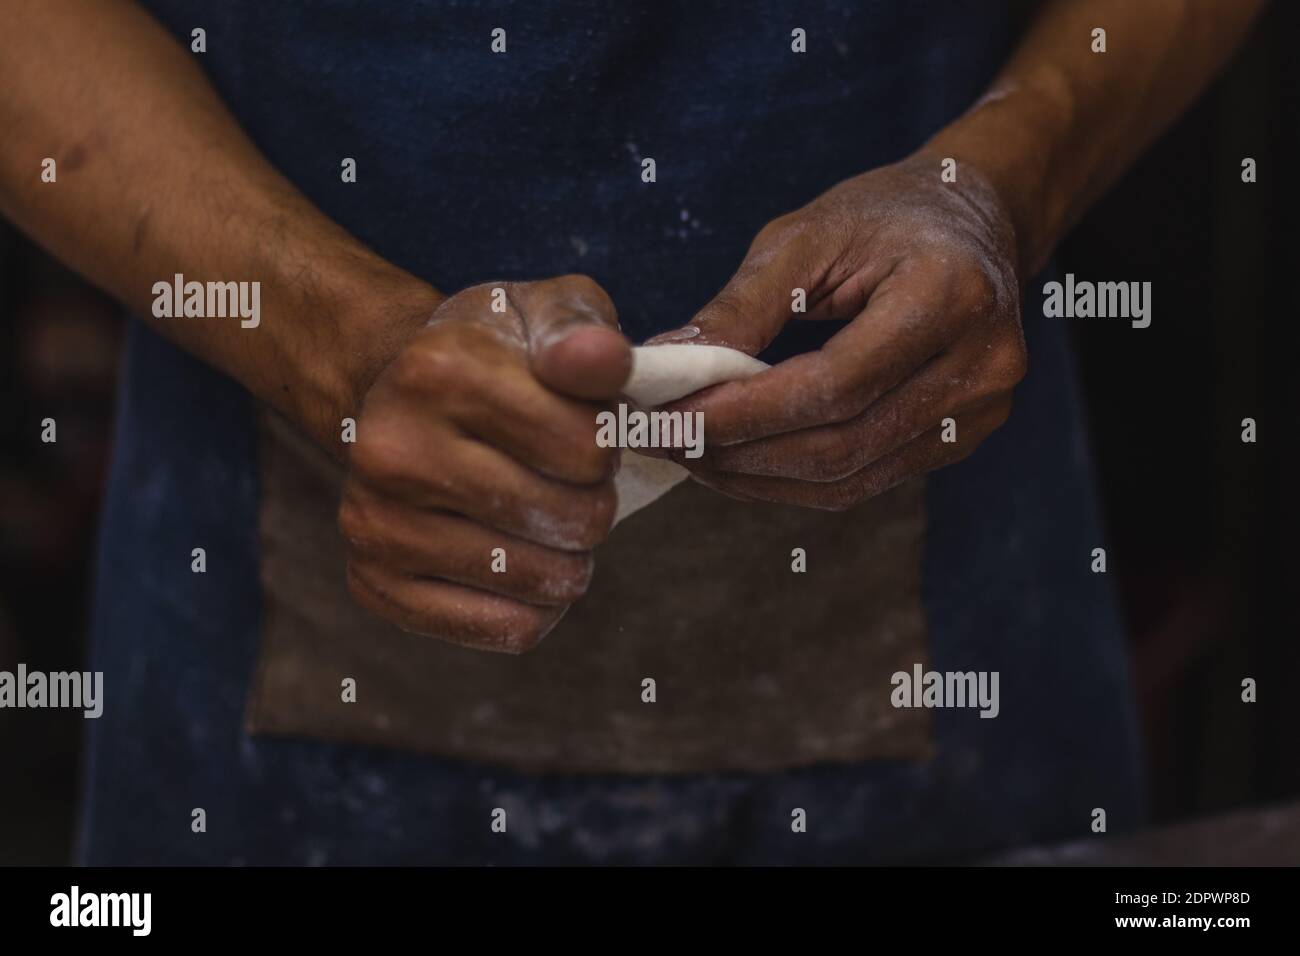 Midsection Of Man Preparing Food Against Black Background Stock Photo